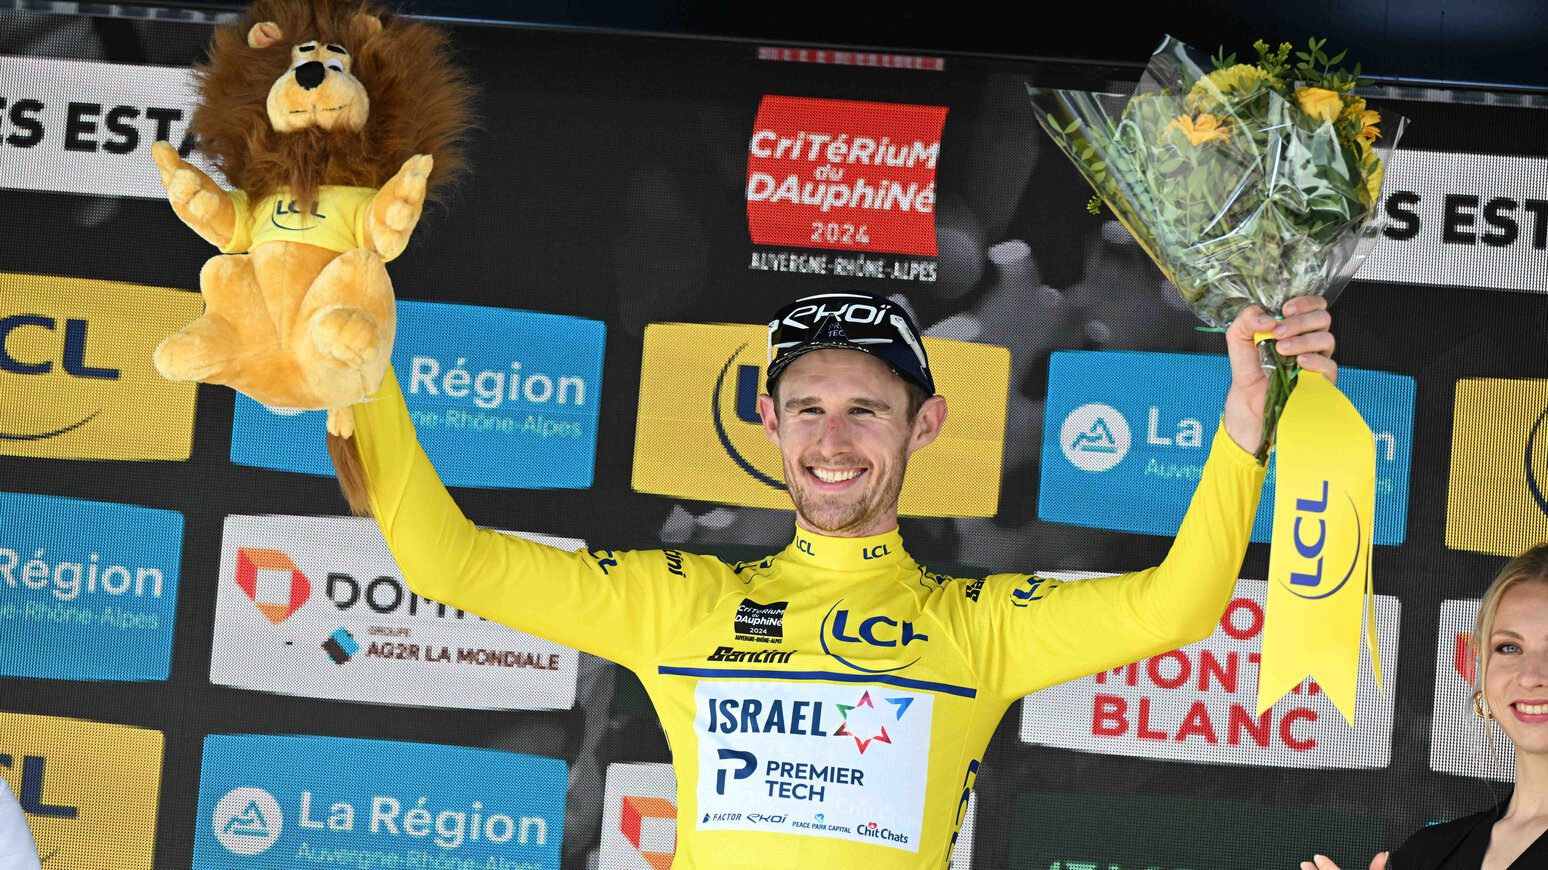 What the Dauphiné and Tour de Suisse results tell us about the Tour de France